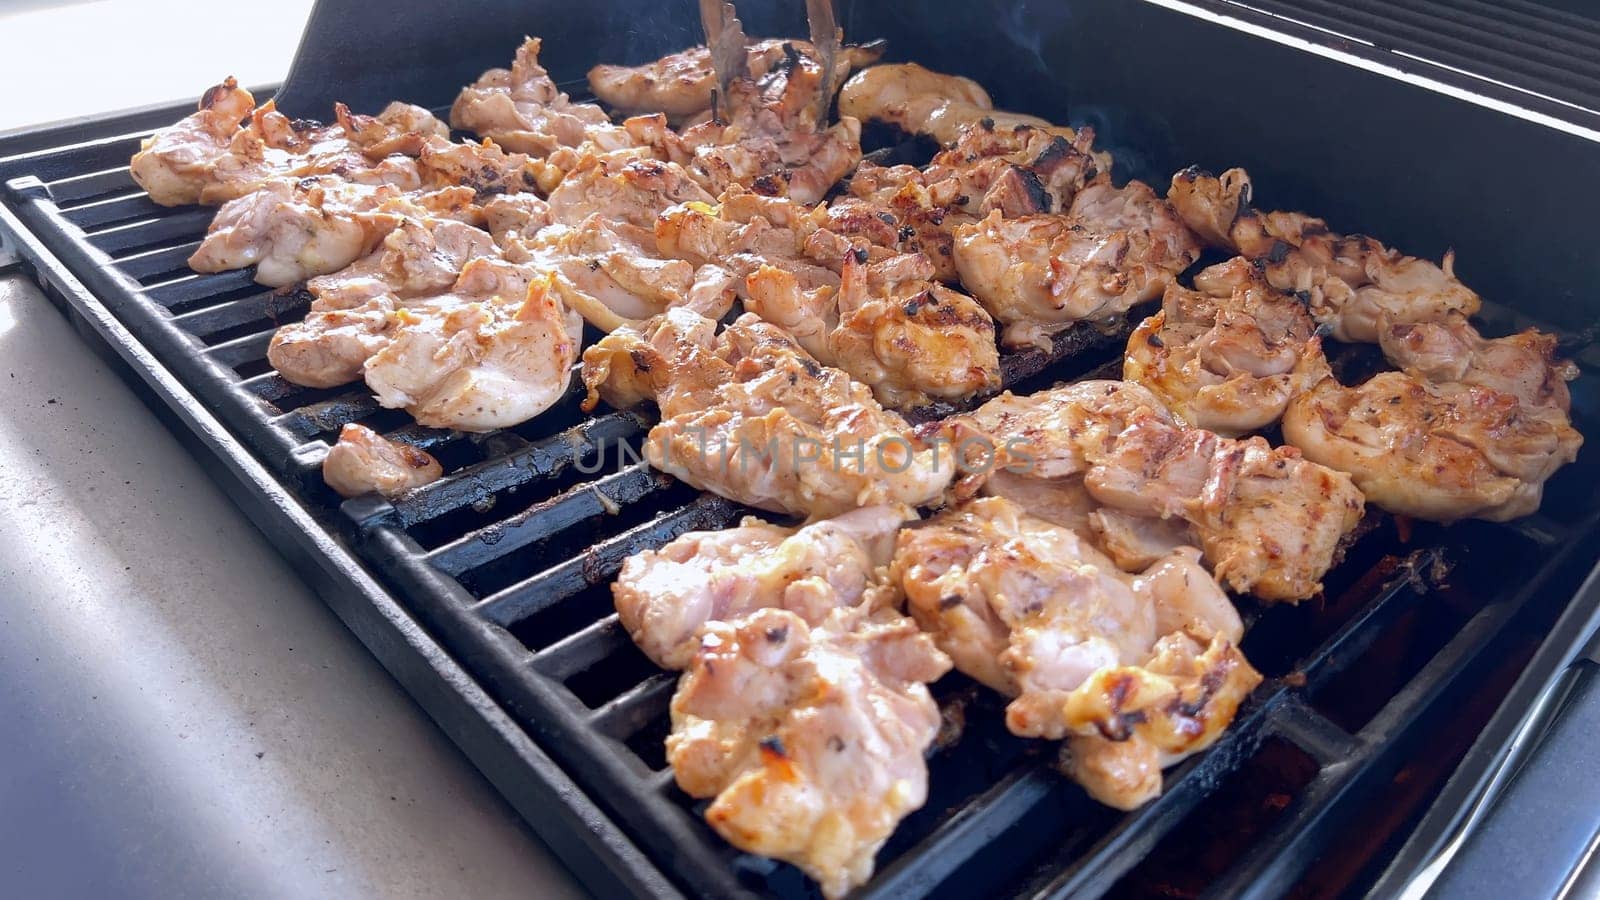 Grilling Marinated Chicken on an Outdoor BBQ Grill by arinahabich